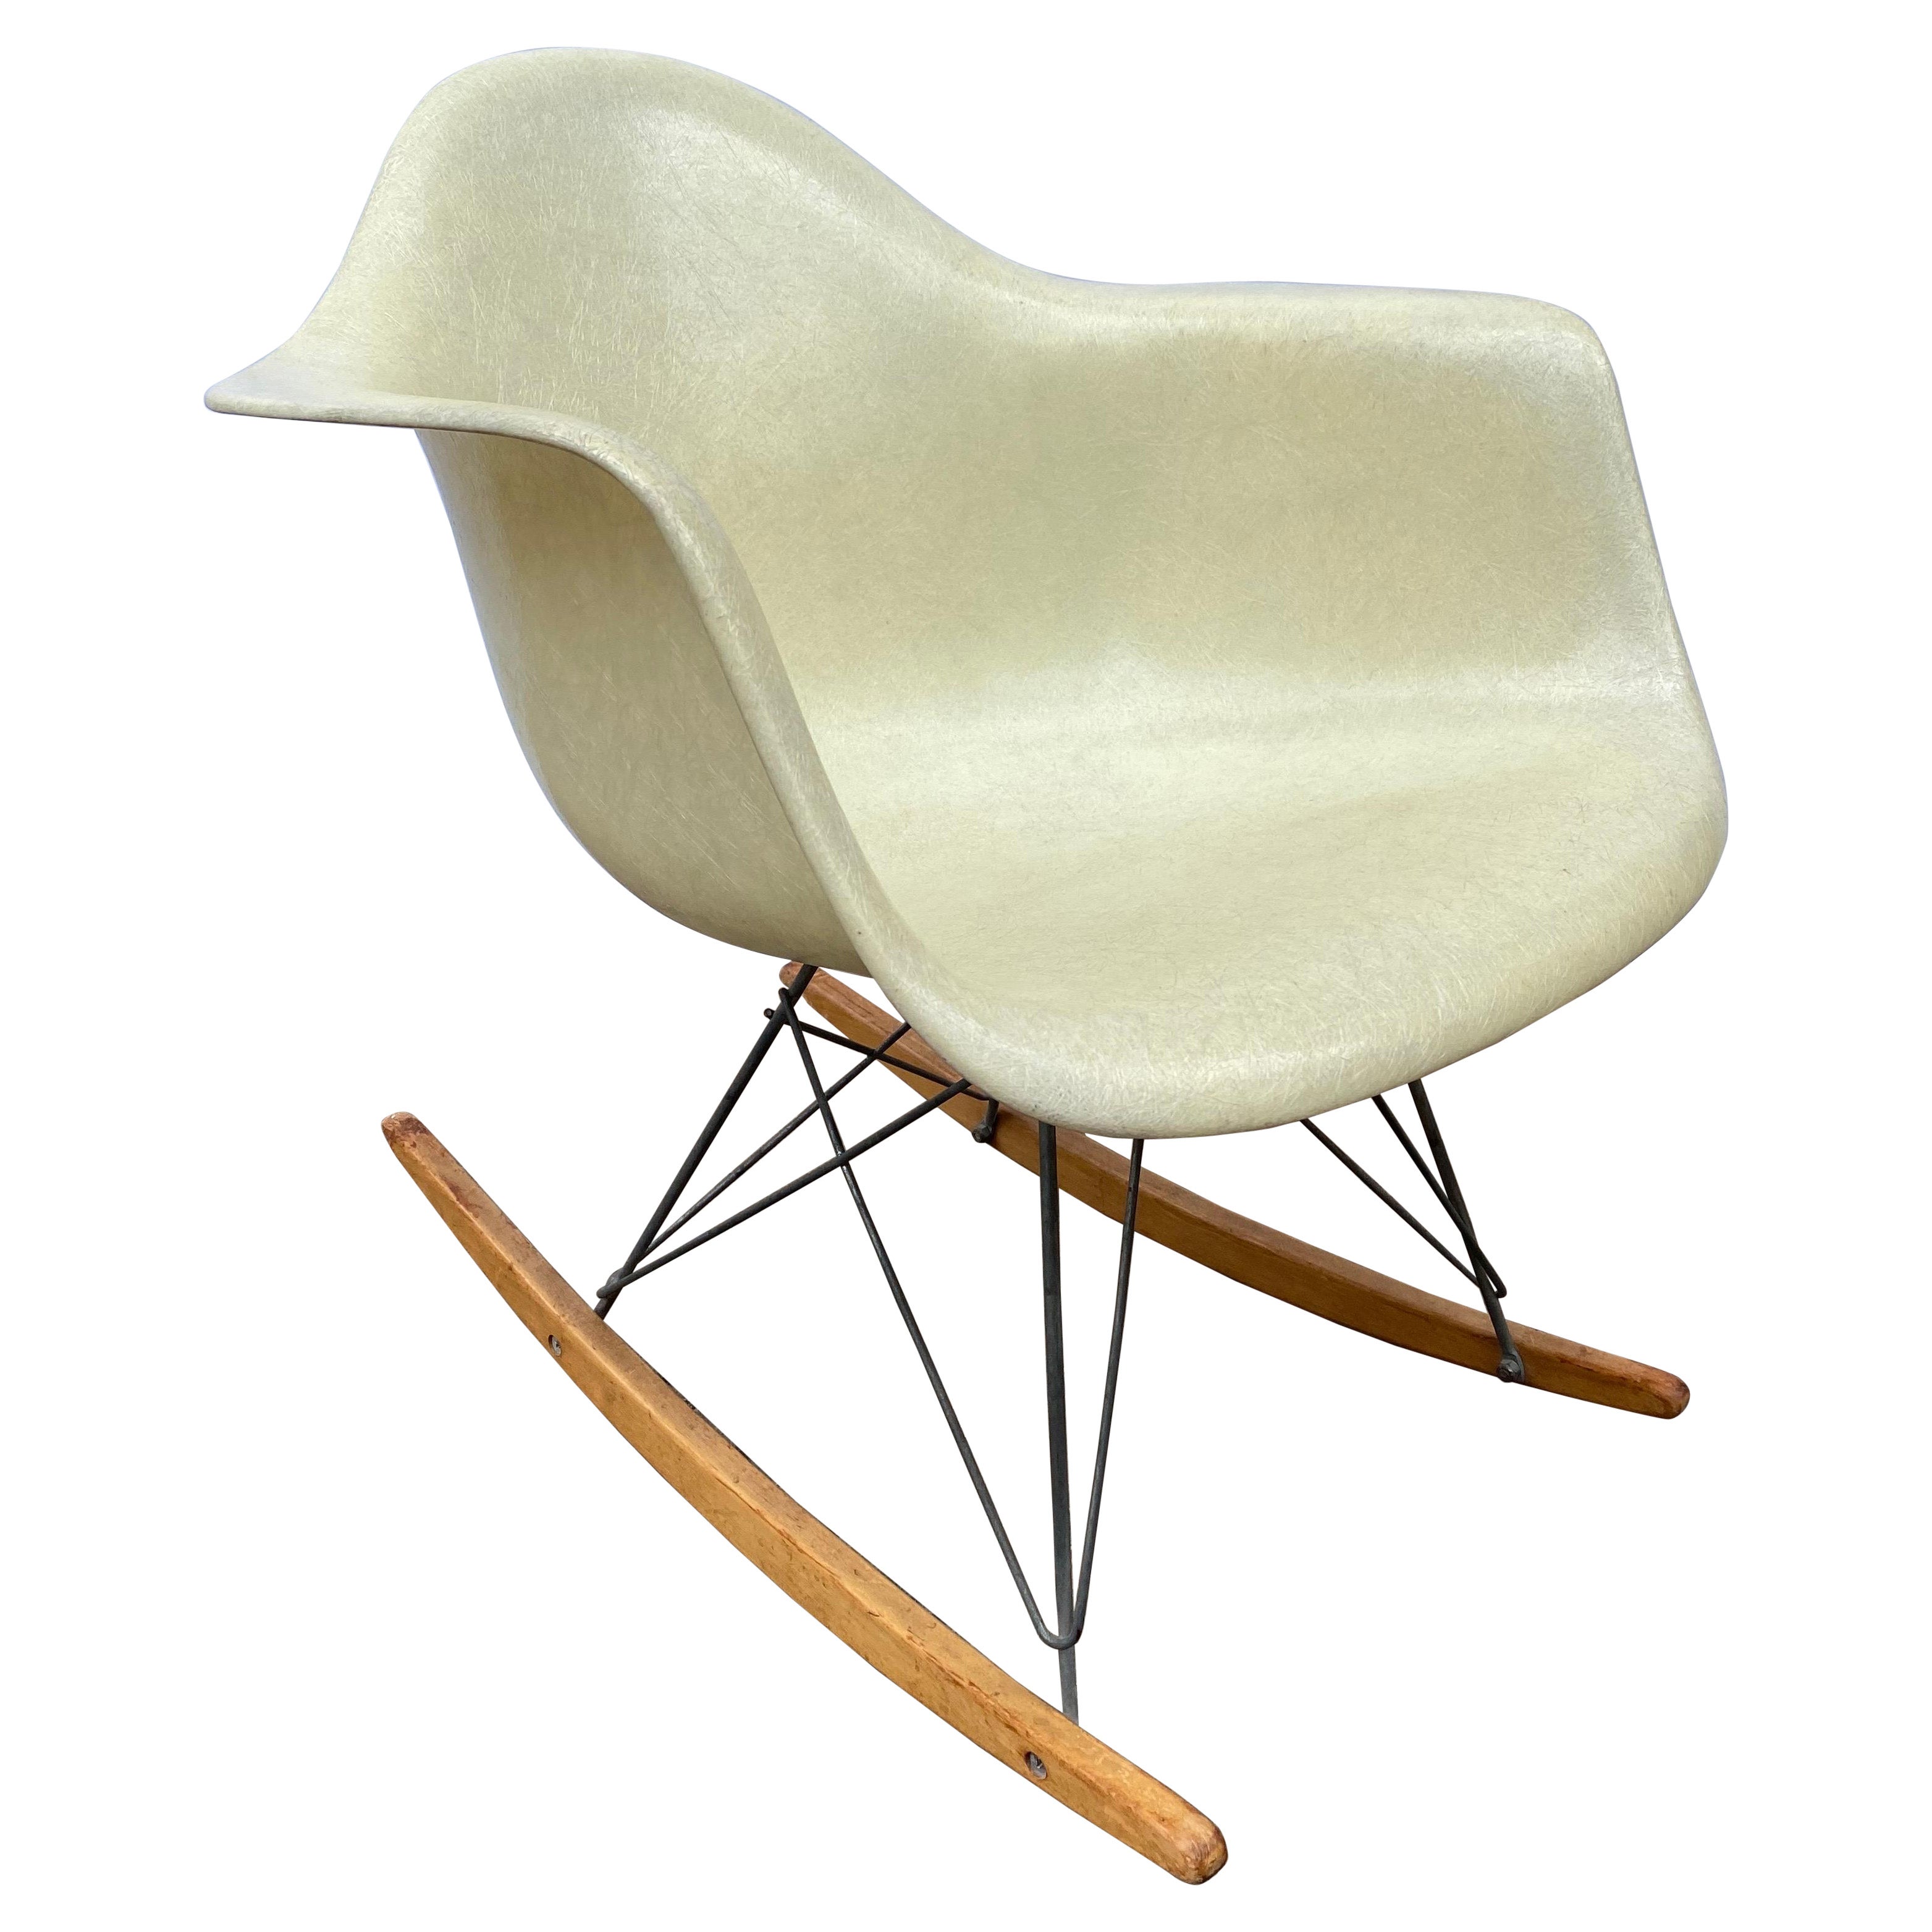 Ray and Charles Eames Rope Edge Zenith Armchair Rocker Purchased in 1951